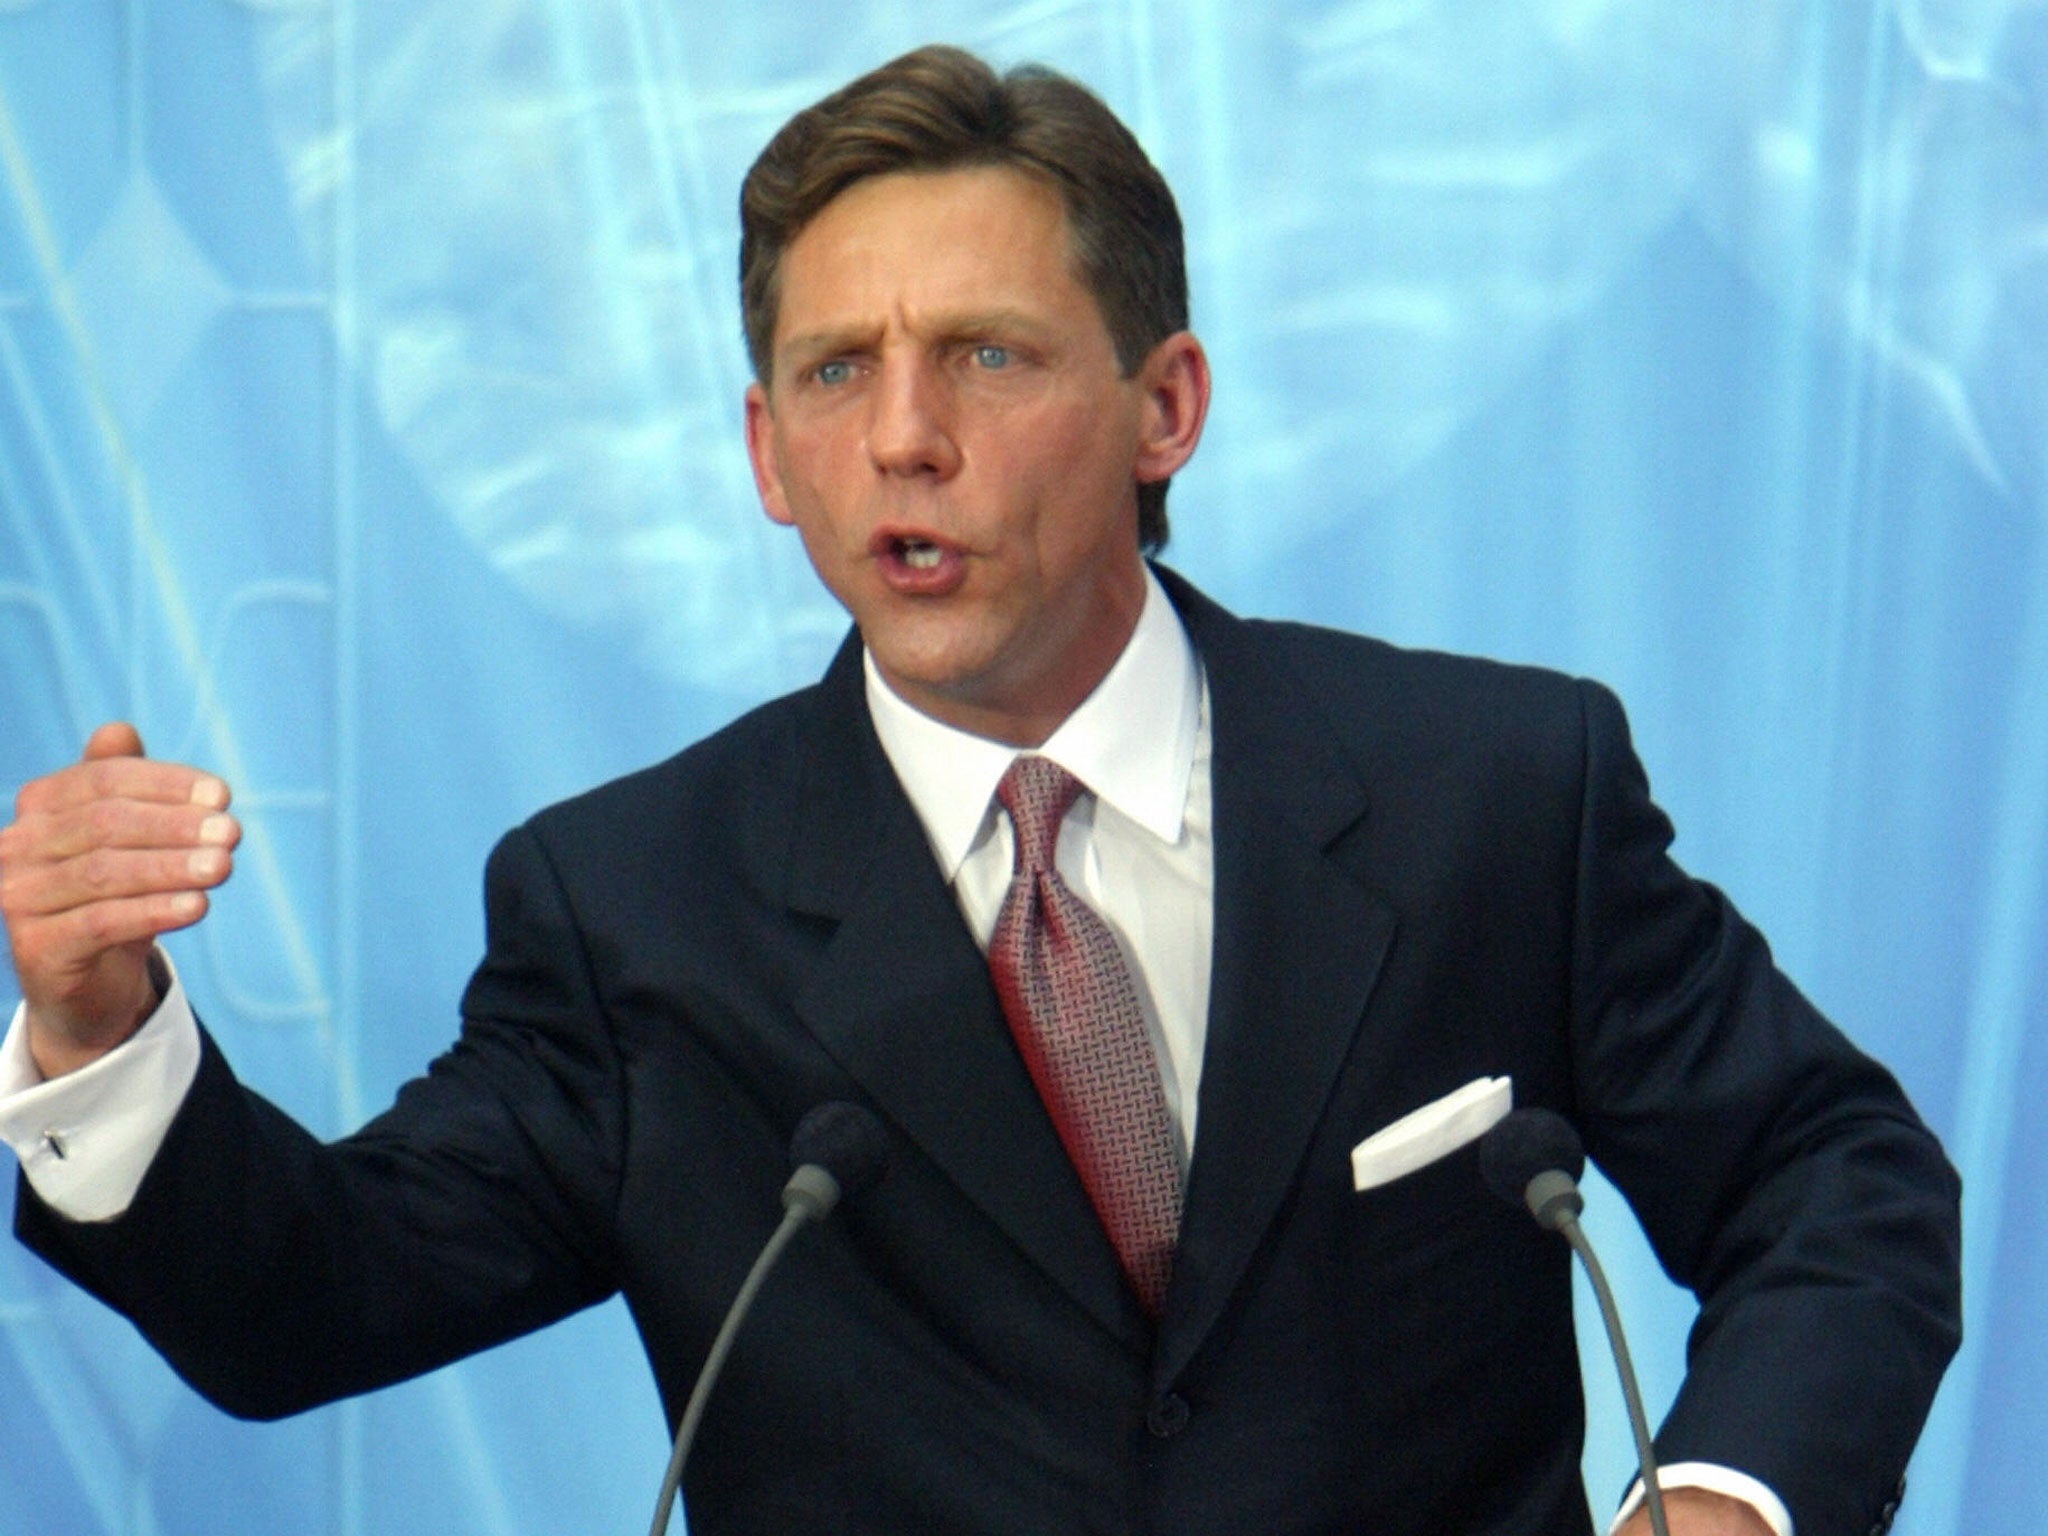 The leader of the Church of Scientology David Miscavige